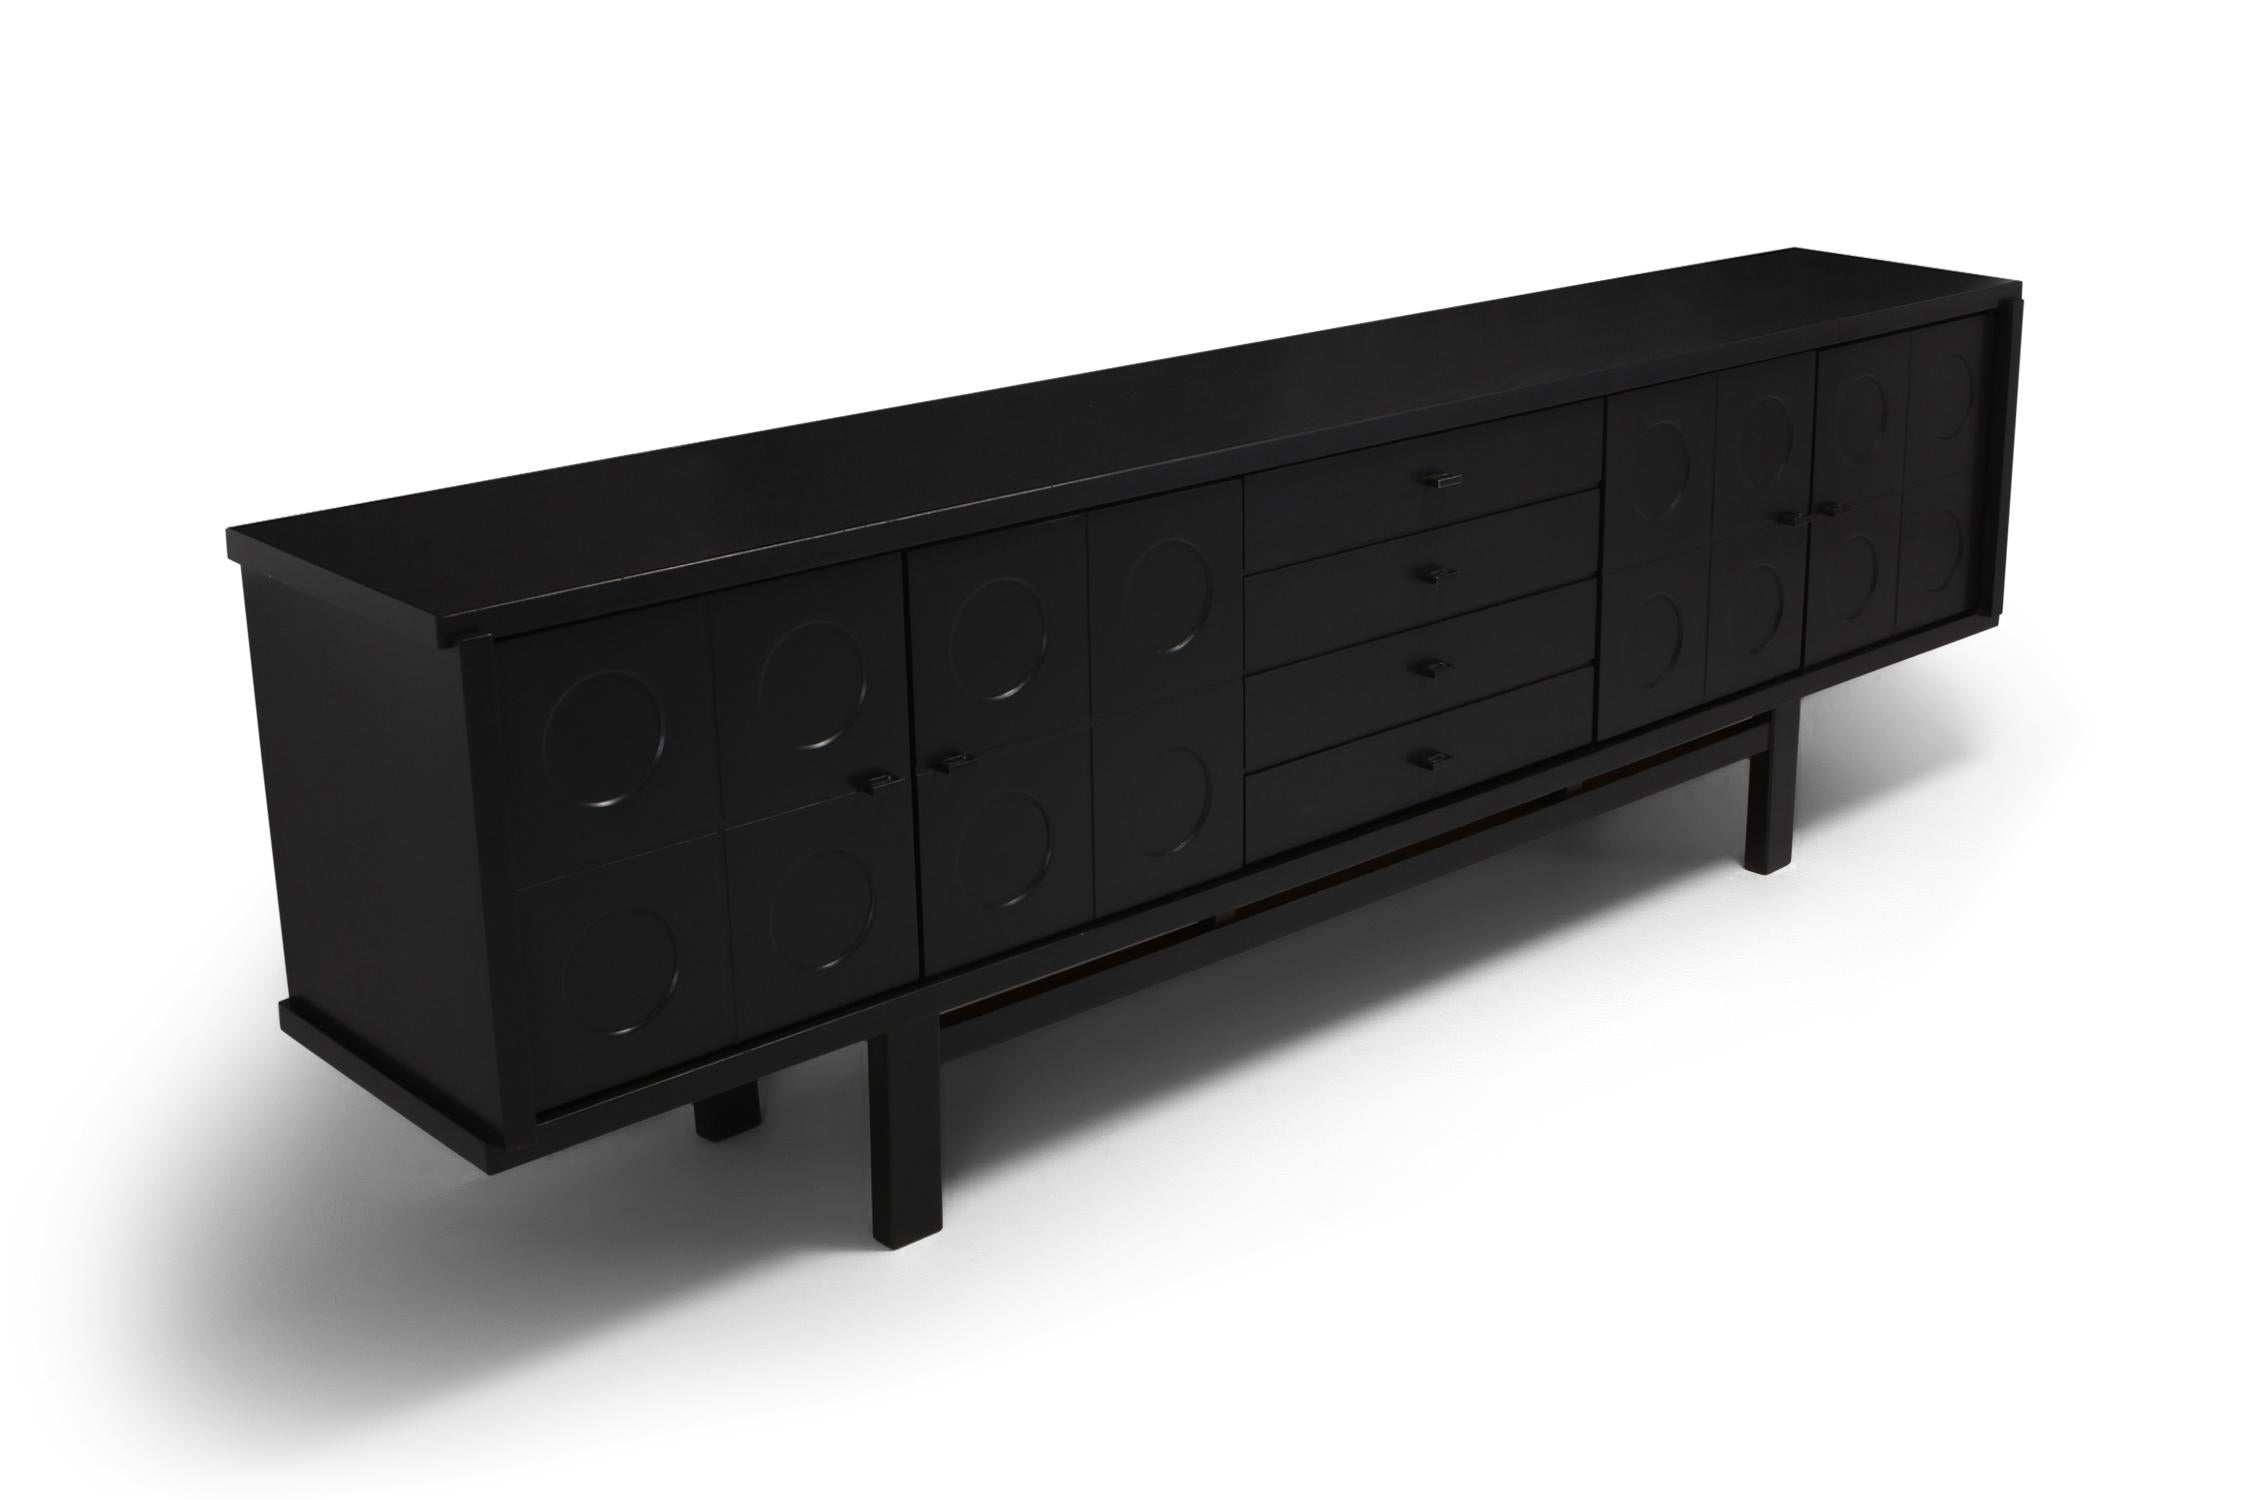 Graphical sideboard made out of ebonized oak. The symmetry of this design combined with the graphical pattern on the doors is adding a brutalist expression to this storage piece. It contains plenty of storage with shells on the inside and 4 drawers